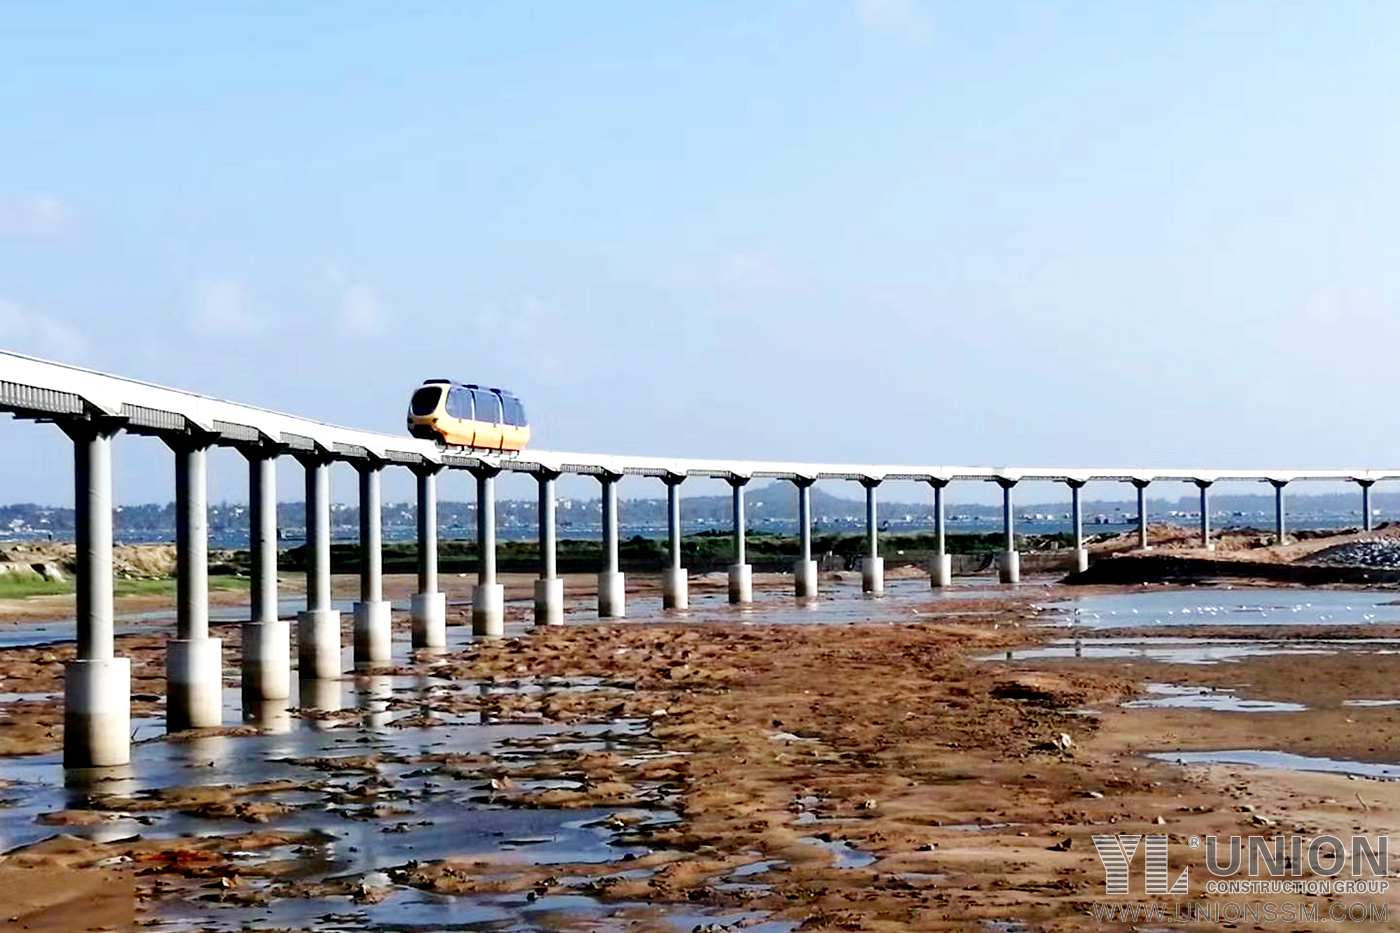 CRRC (Hainan, China)- Shallow Sea Operation Monorail Sightseeing Train Tracks with Steel Piers and Bridges